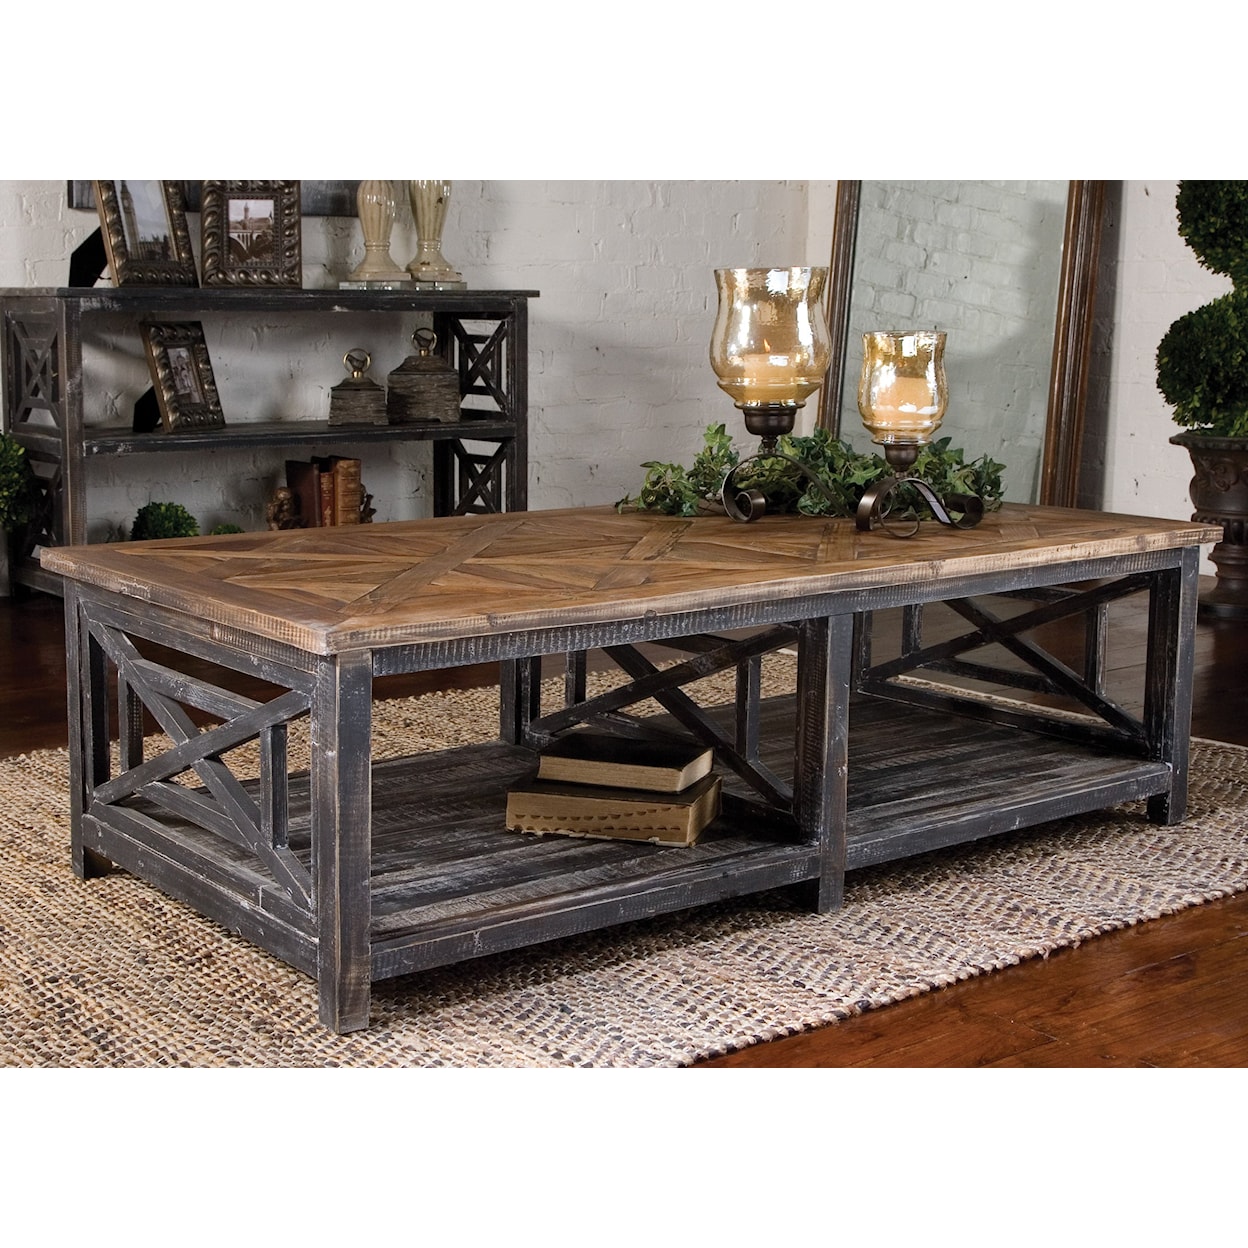 Uttermost Accent Furniture - Occasional Tables Spiro Cocktail Table